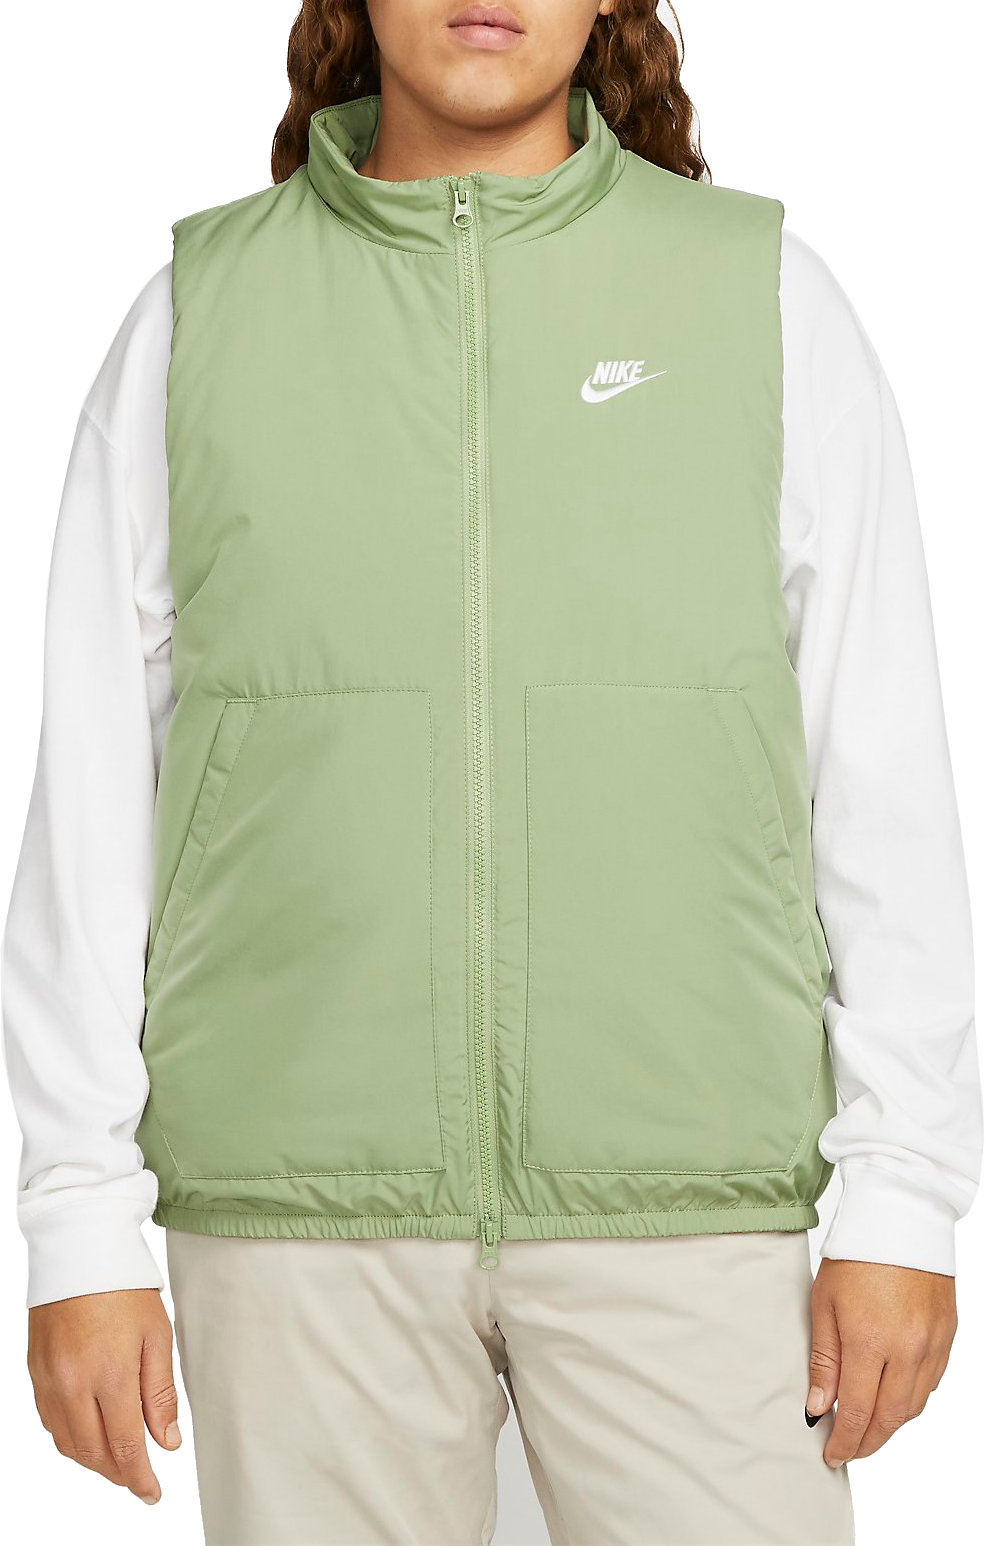 Vest Nike Therma-FIT Club - Men's Woven Insulated Gilet